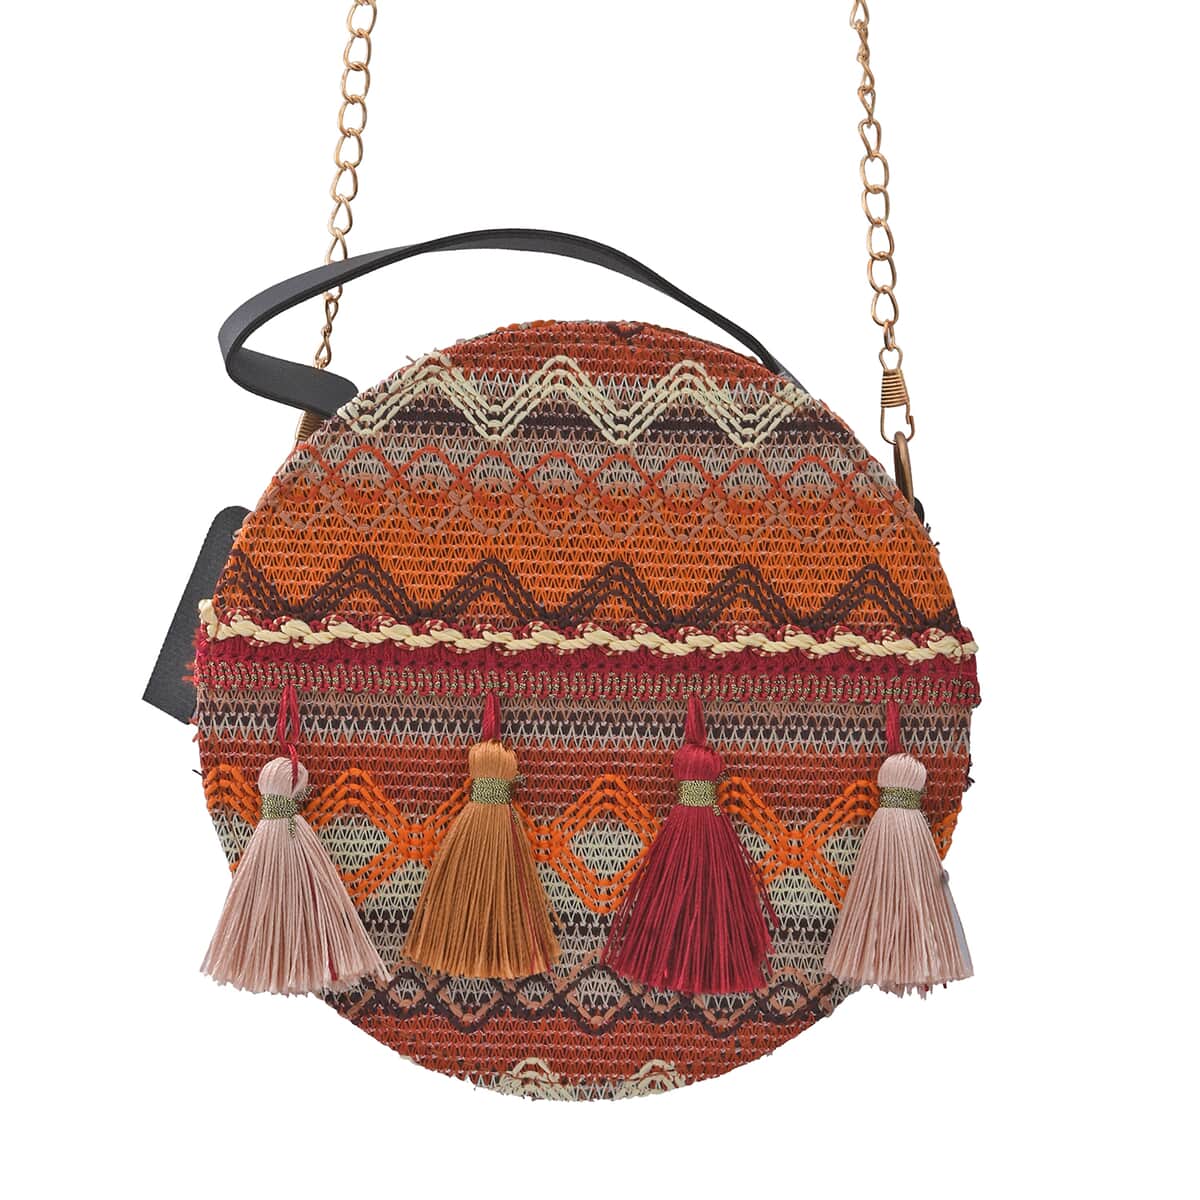 Handwoven embroidered day purse with leather accents